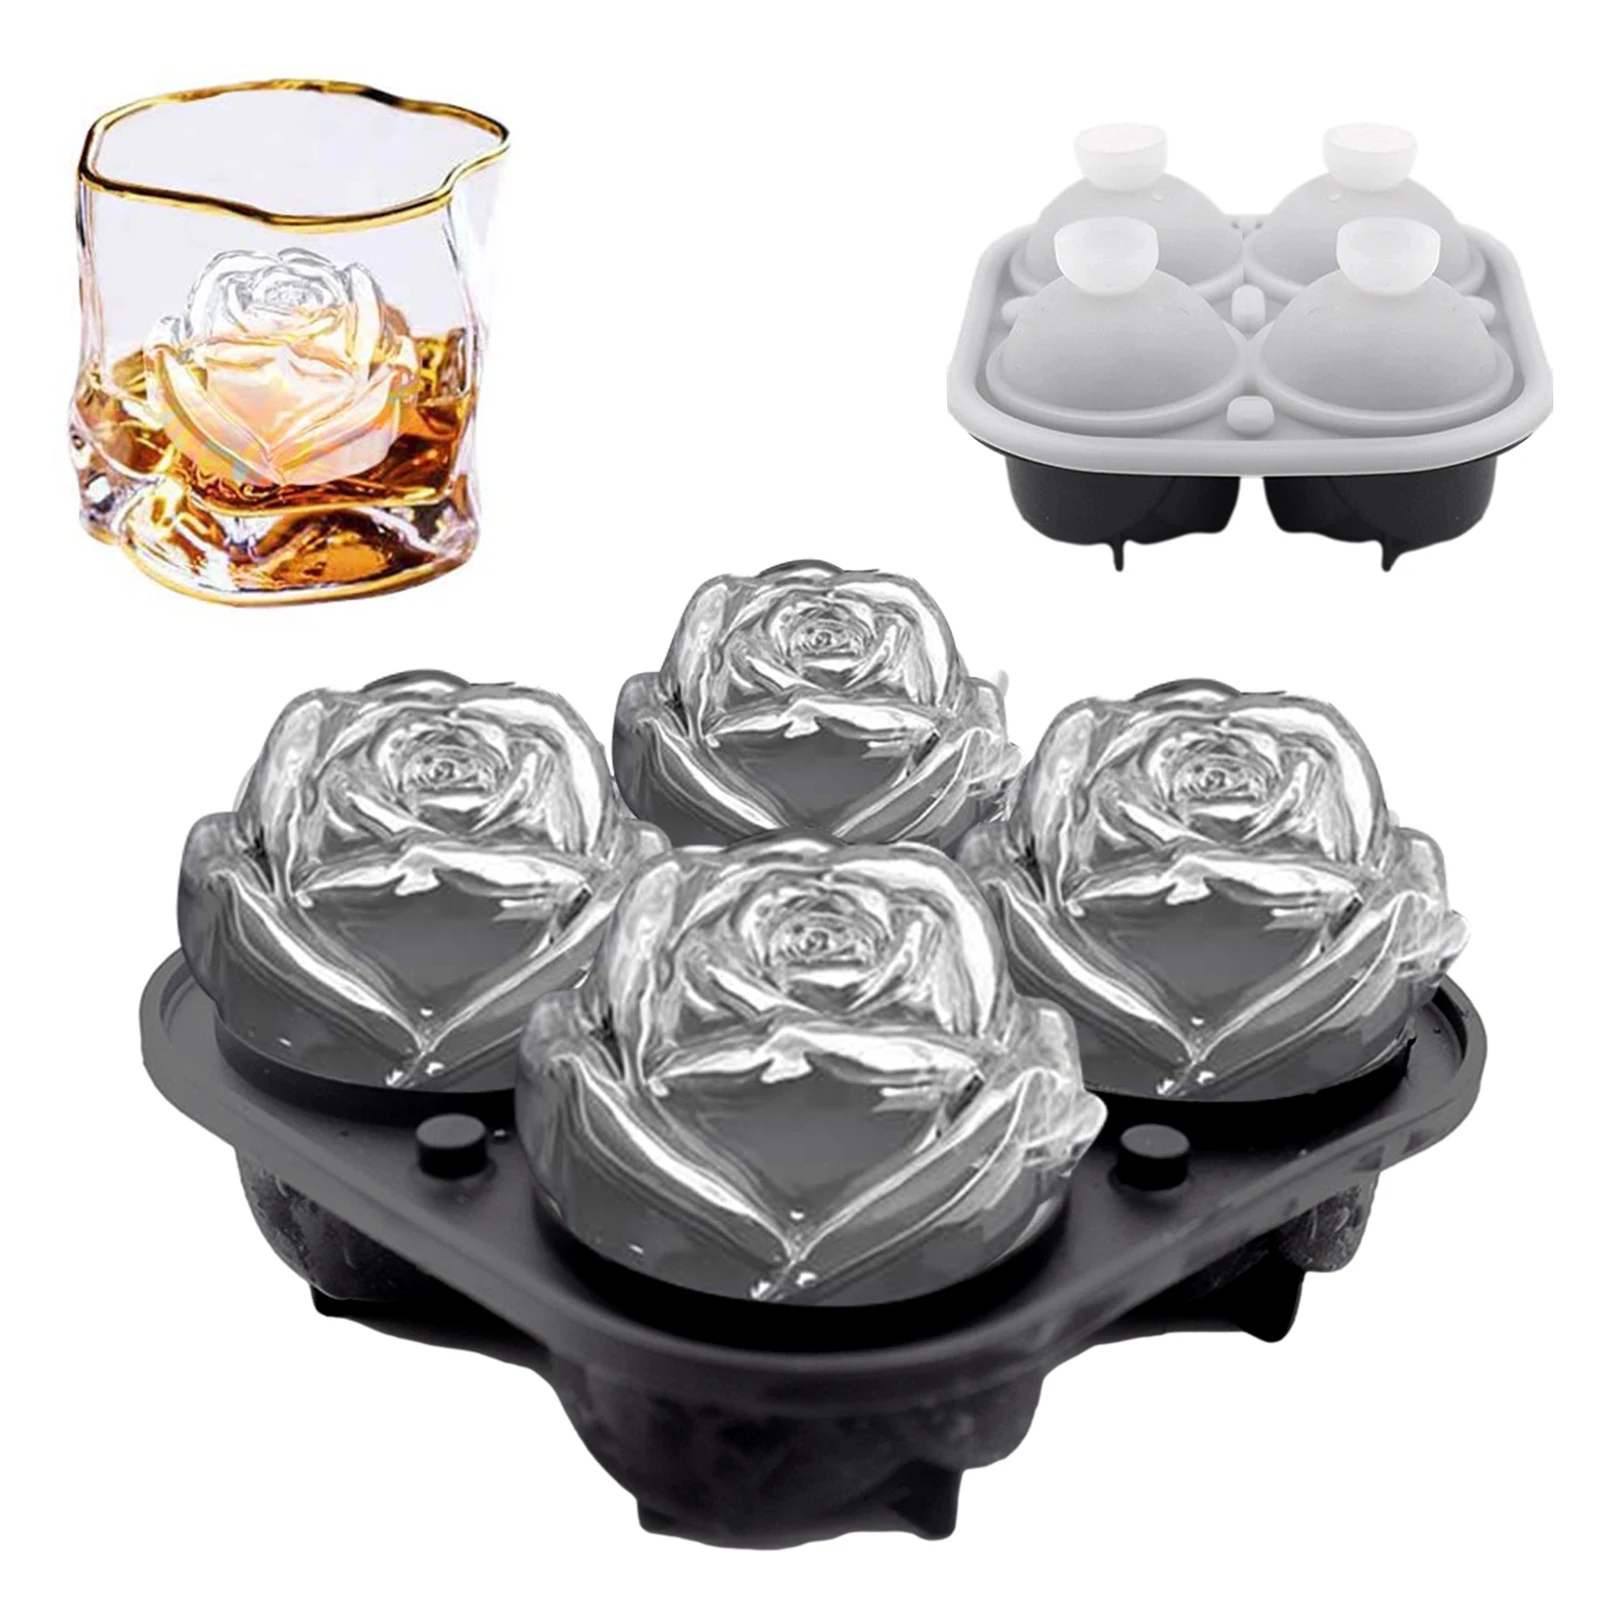 

3D Rose Ice Cube Trays 5cm Silicone 4 Grids Ice Cubes Mold With Funnel-Shaped Lid Reusable Frozen Mold For Whiskey Cocktails